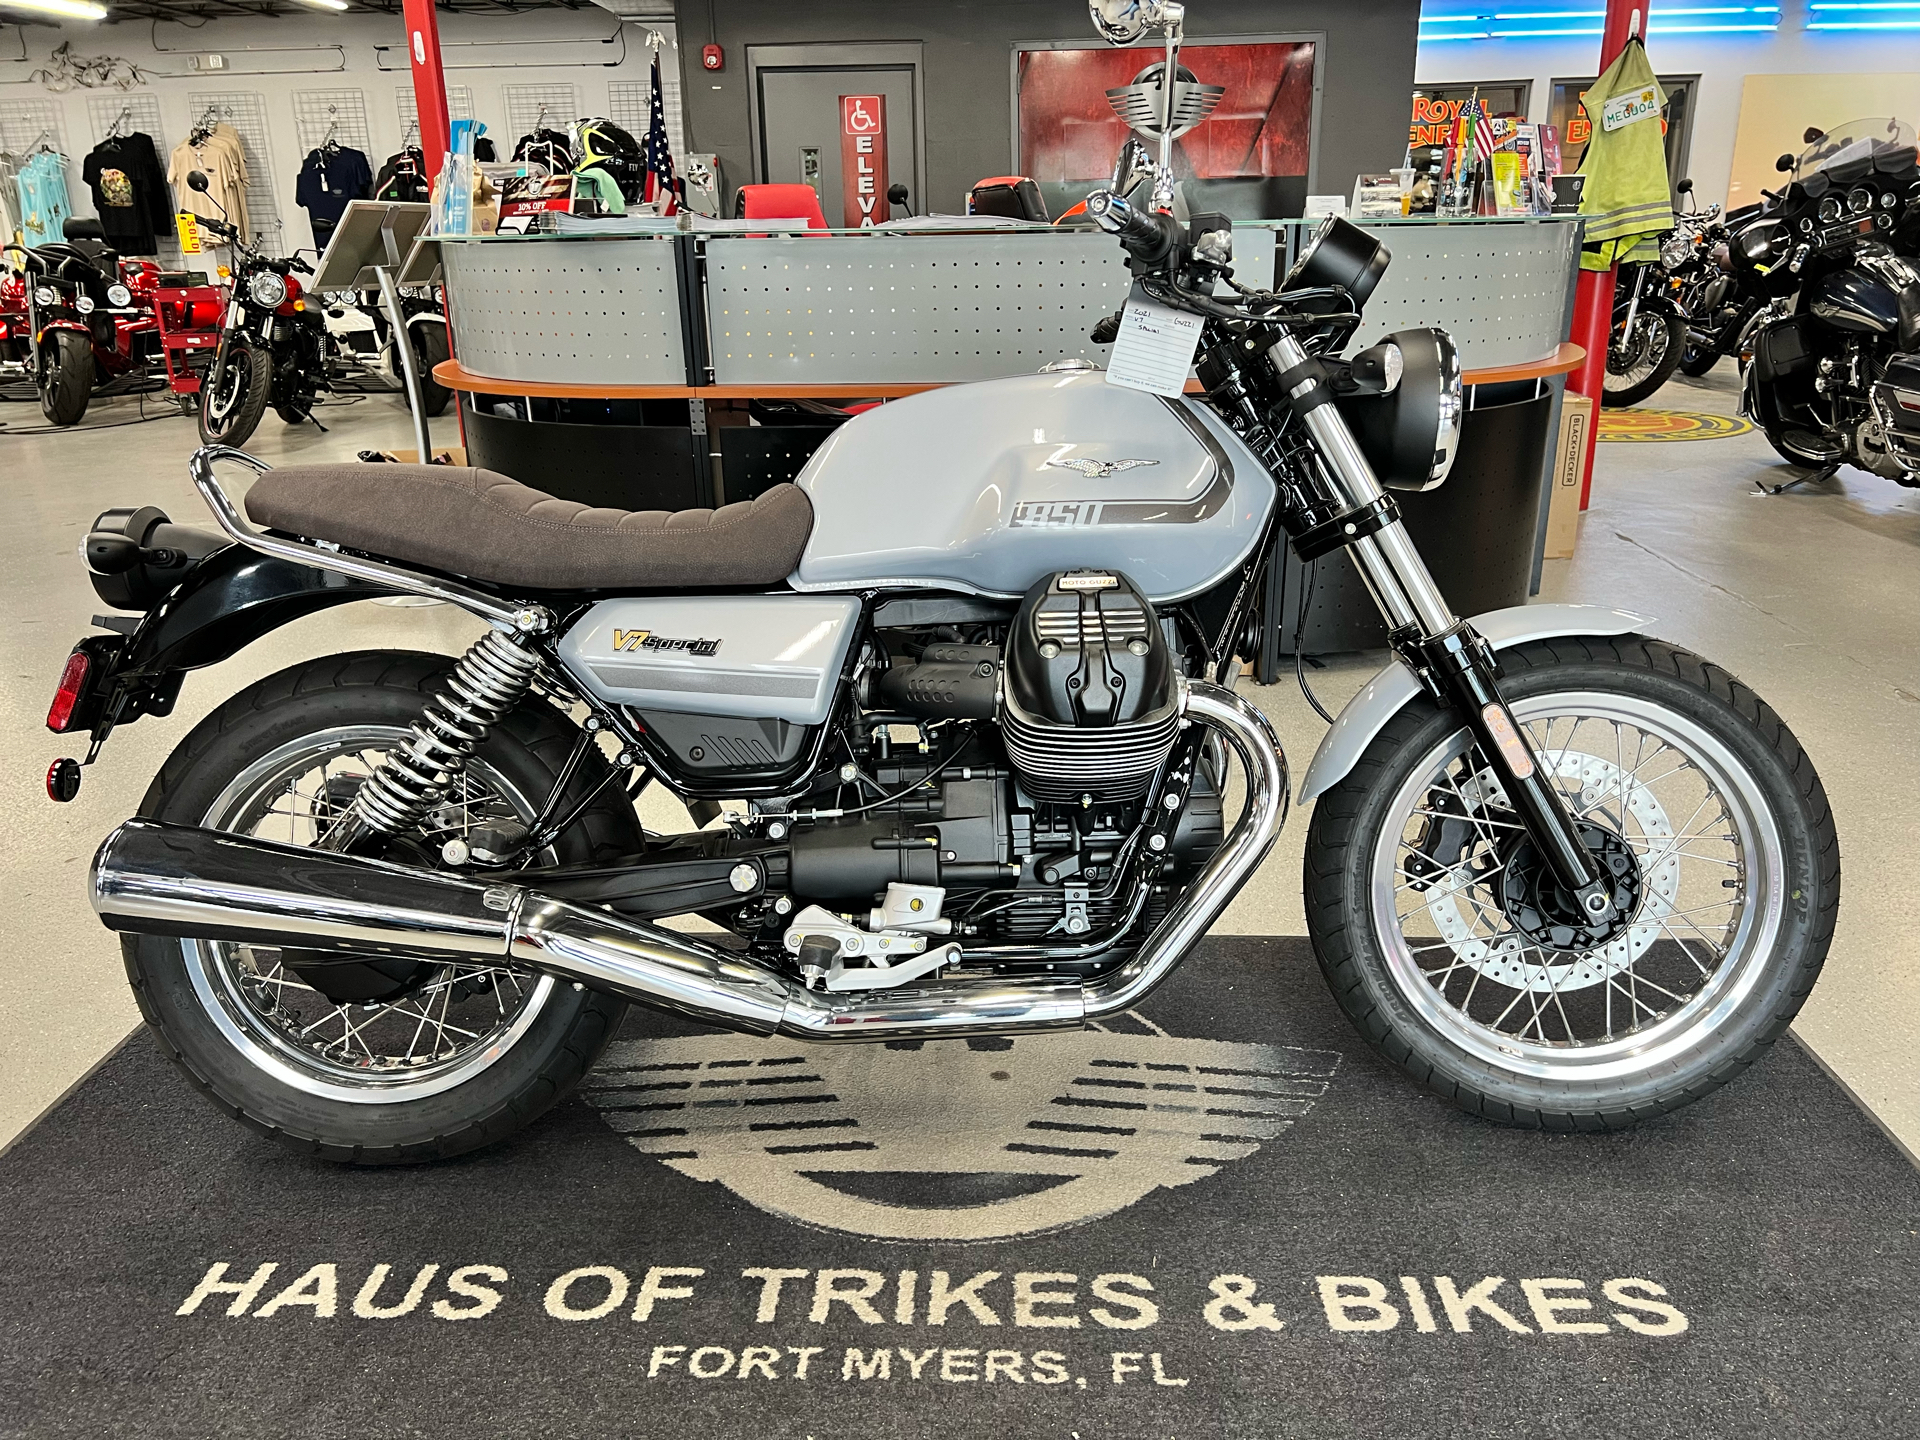 2021 Moto Guzzi V7 Special E5 in Fort Myers, Florida - Photo 1